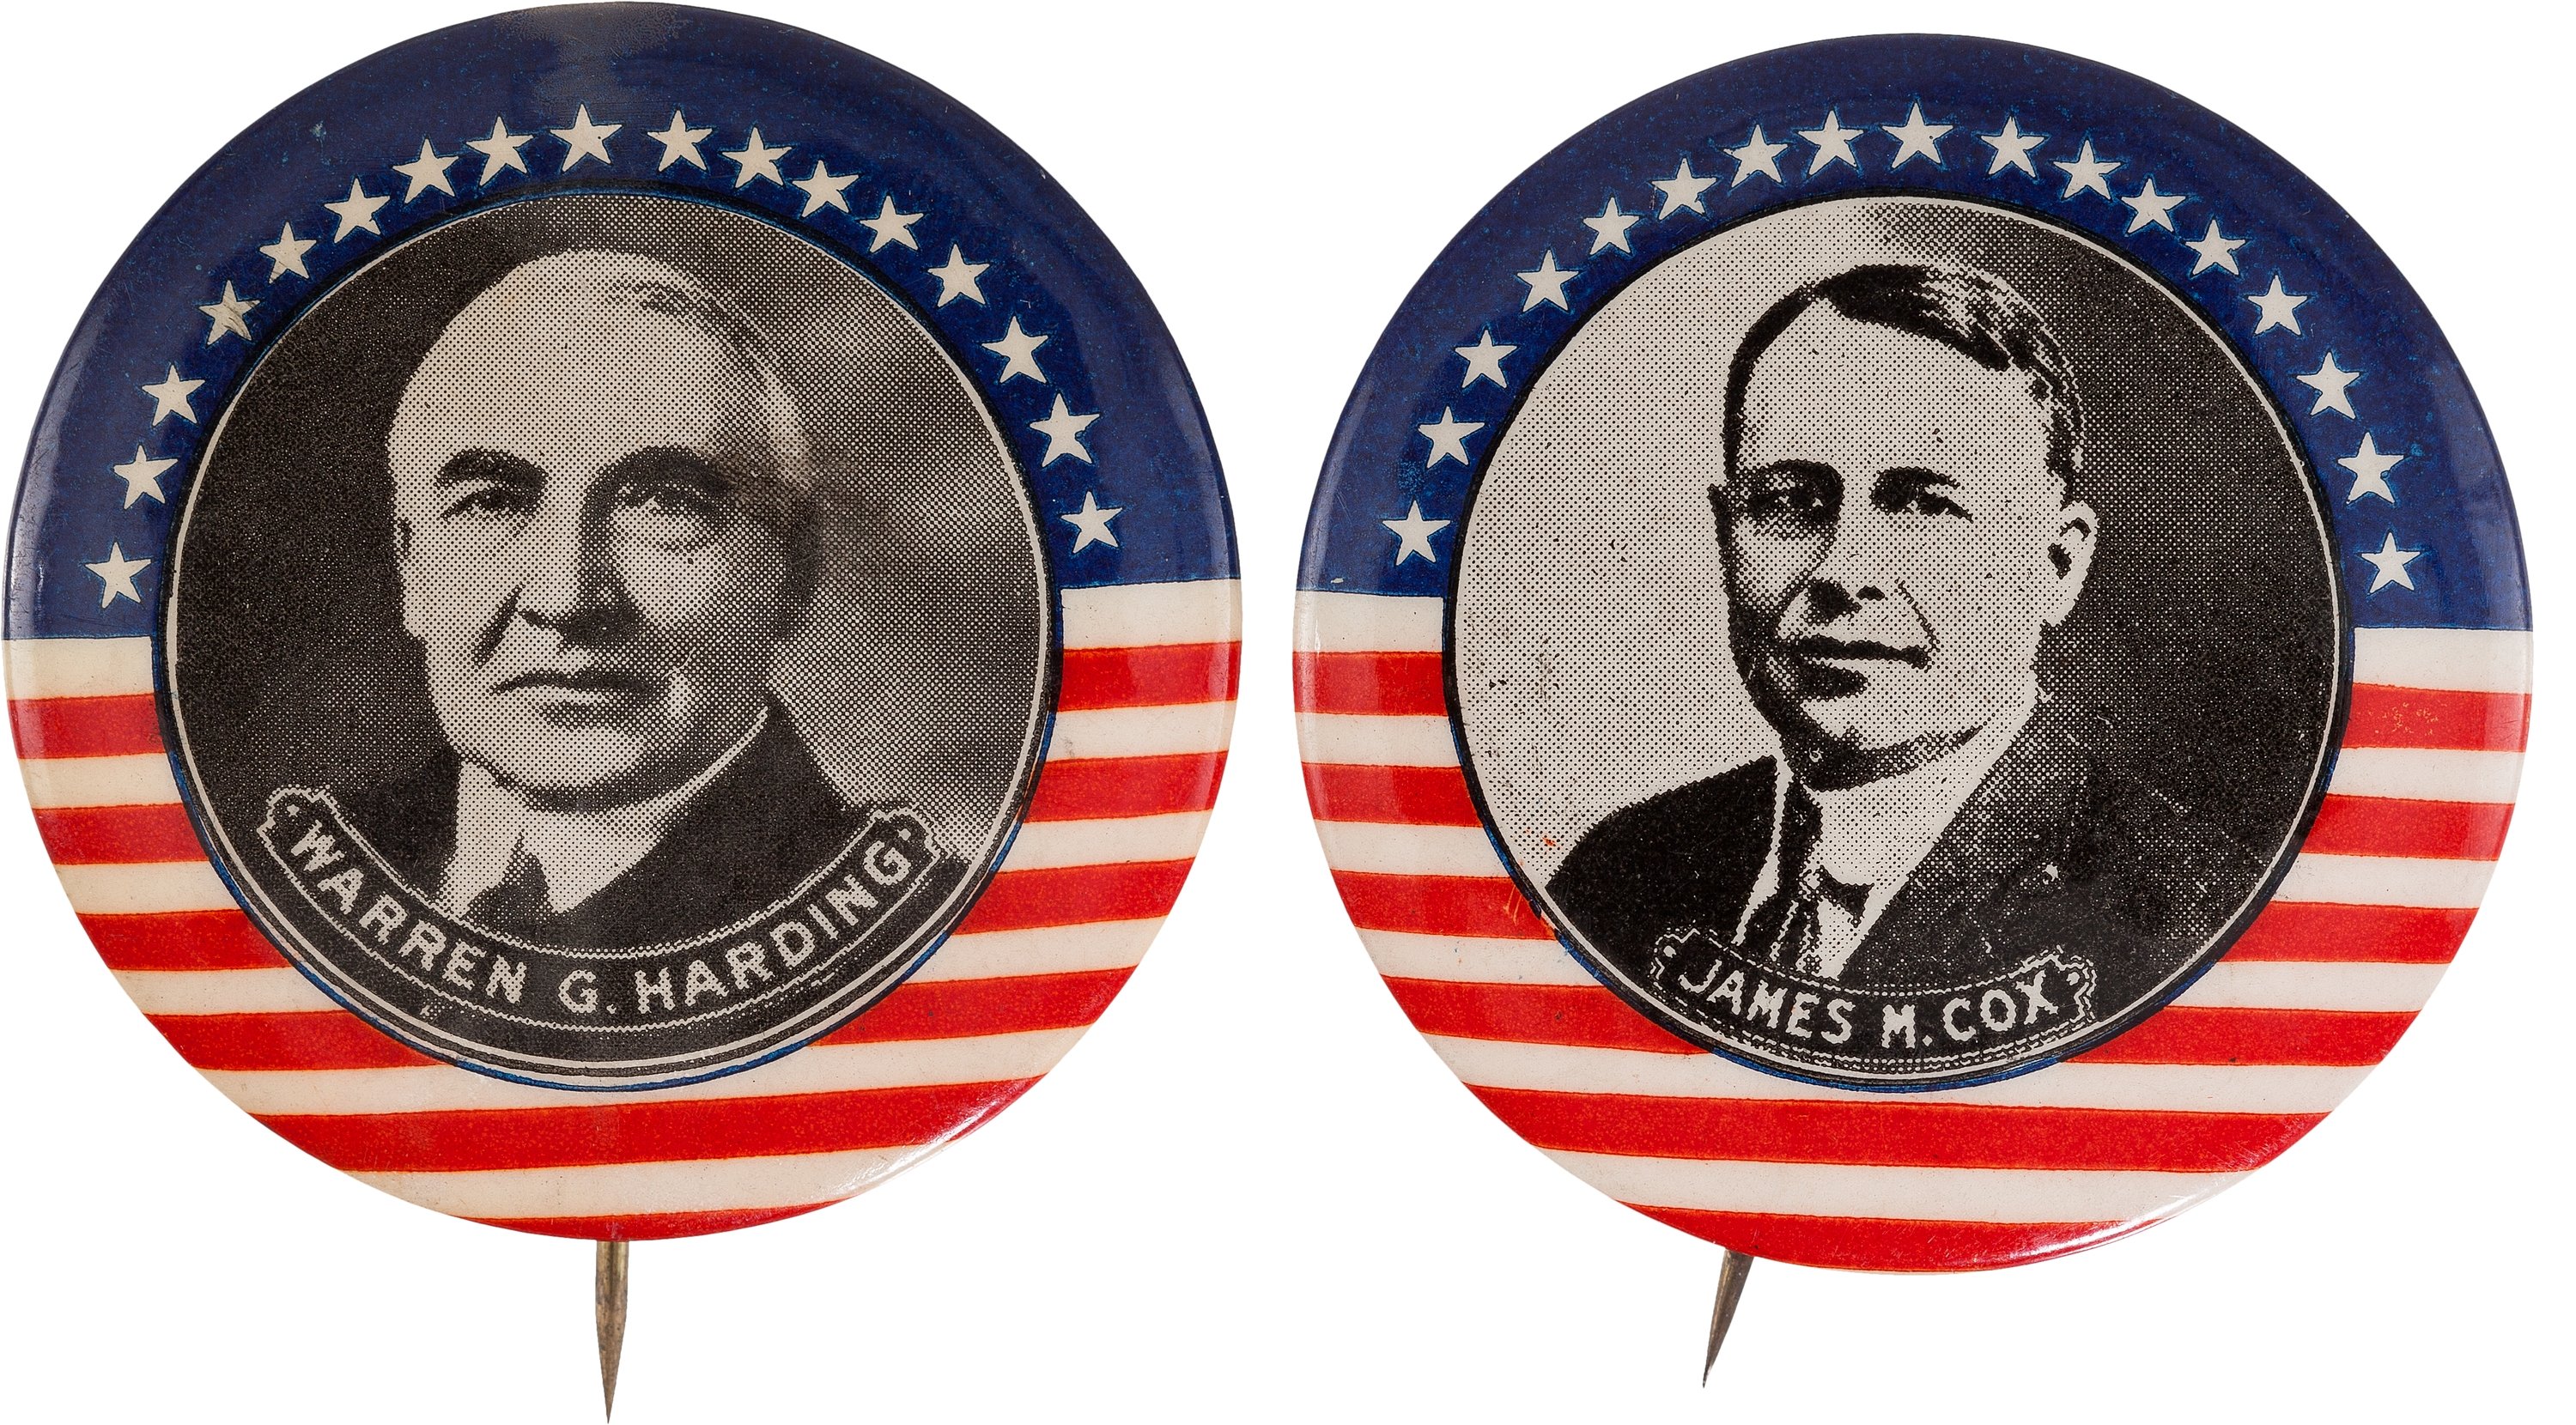 warren-g-harding-and-james-m-cox-absolutely-stunning-matched-pair-of-large-1920-rarities